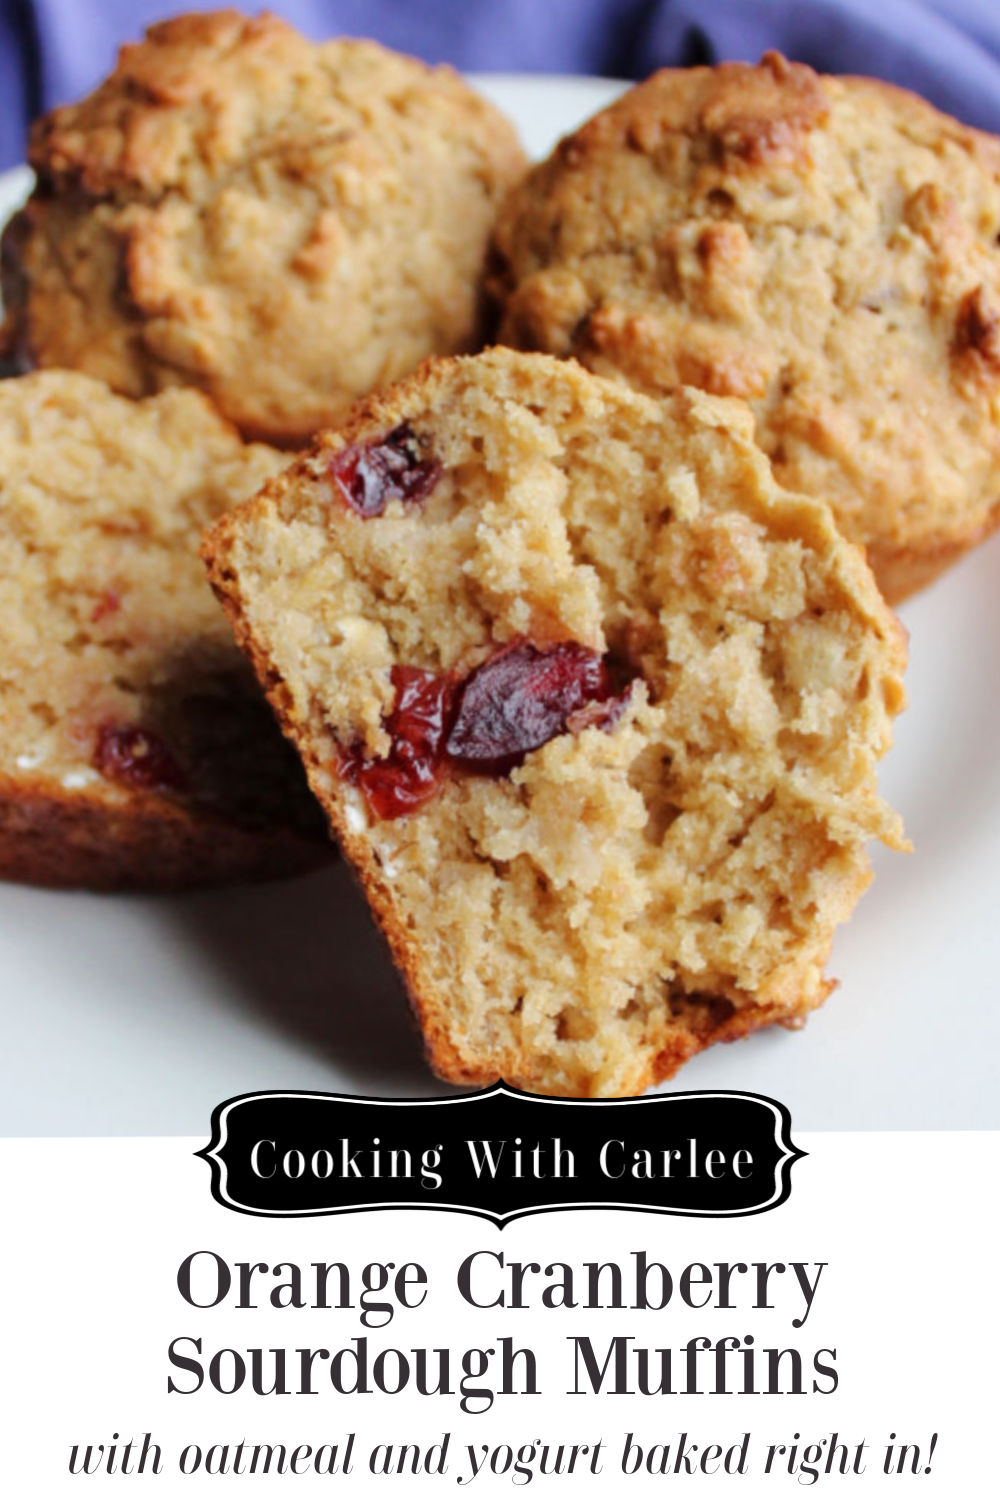 Orange and cranberries come together with just a hint of spice in these oatmeal sourdough muffins. They are a perfect grab and go breakfast or fun healthier brunch treat. 